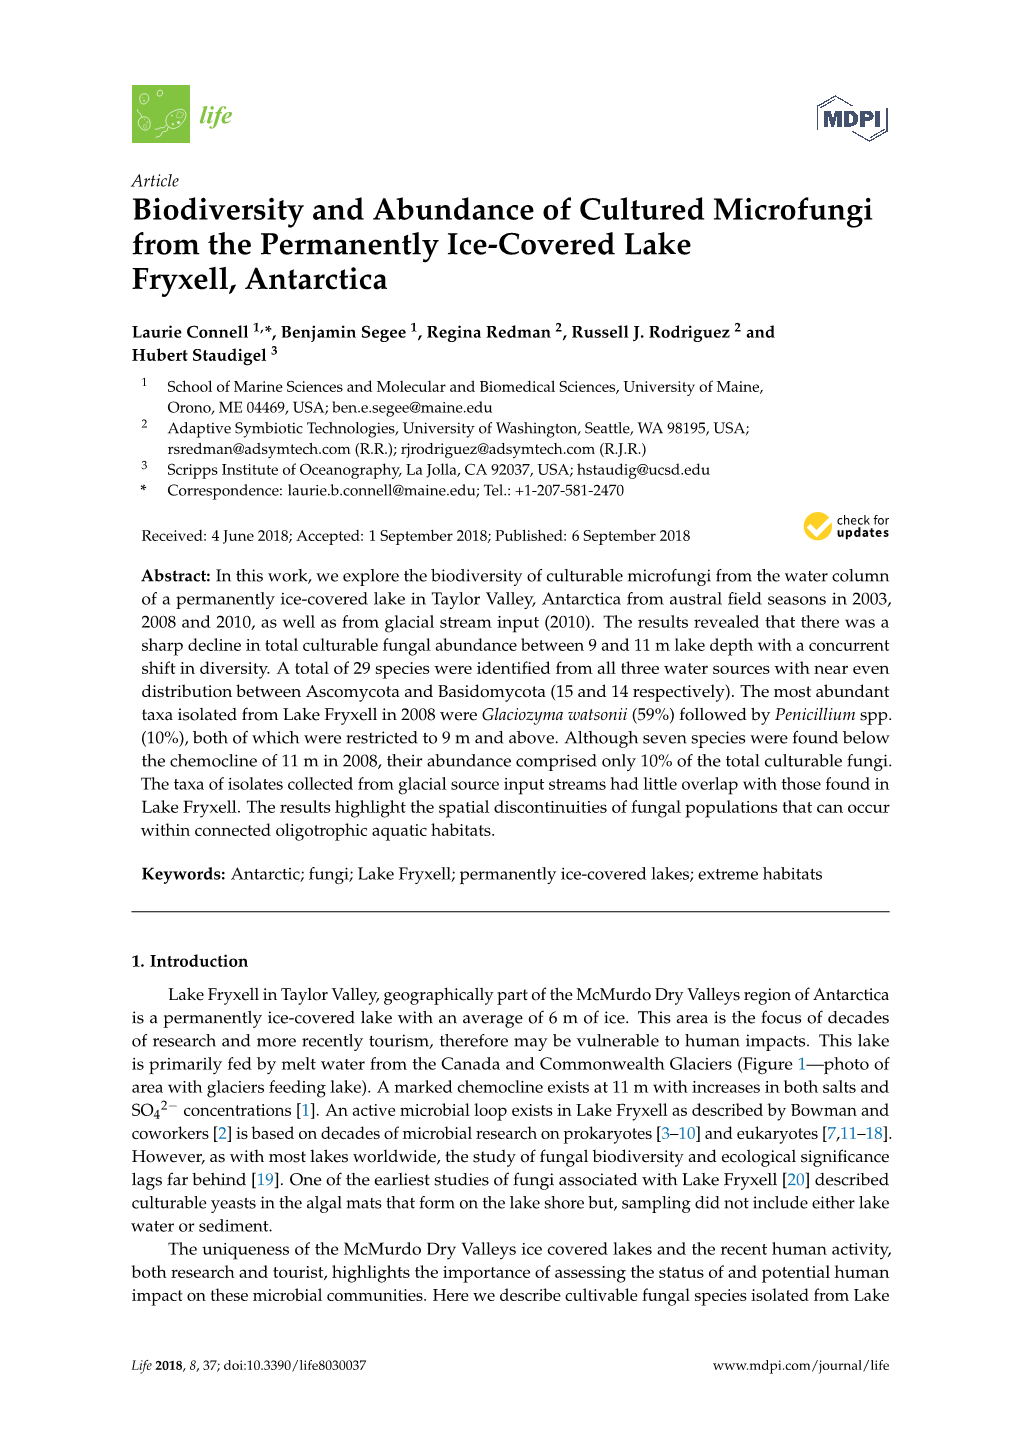 Biodiversity and Abundance of Cultured Microfungi from the Permanently Ice-Covered Lake Fryxell, Antarctica